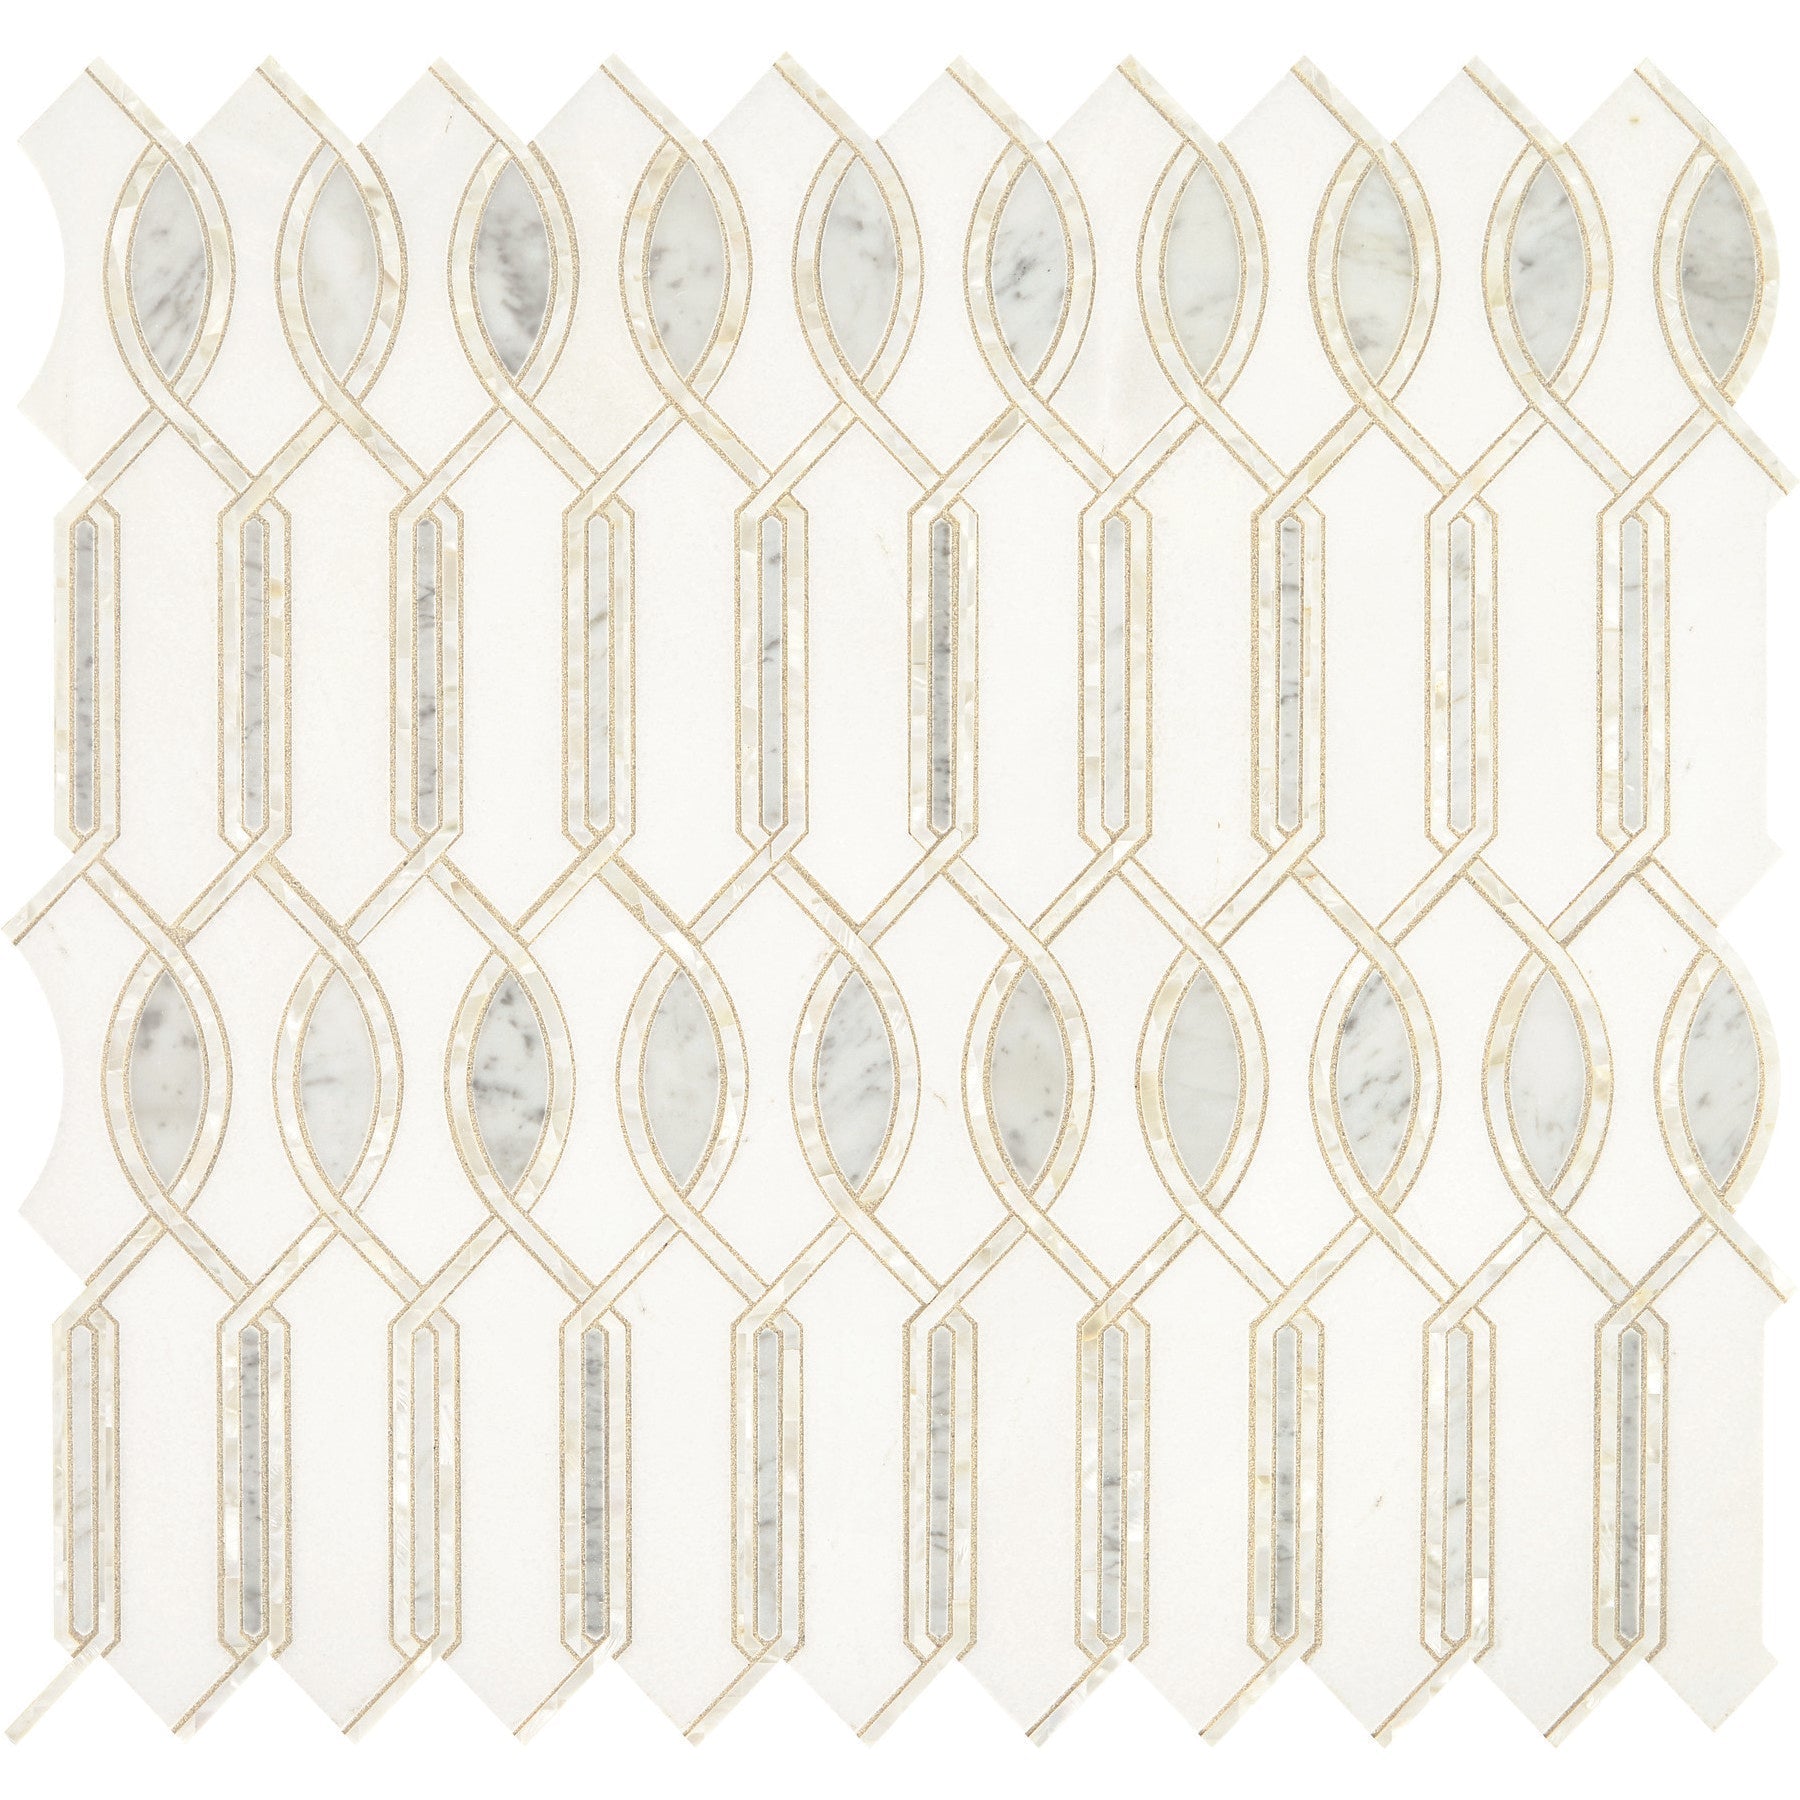 Daltile - Lavaliere Imaginare Mosaic - Thassos White With Carrara White and Mother of Pearl